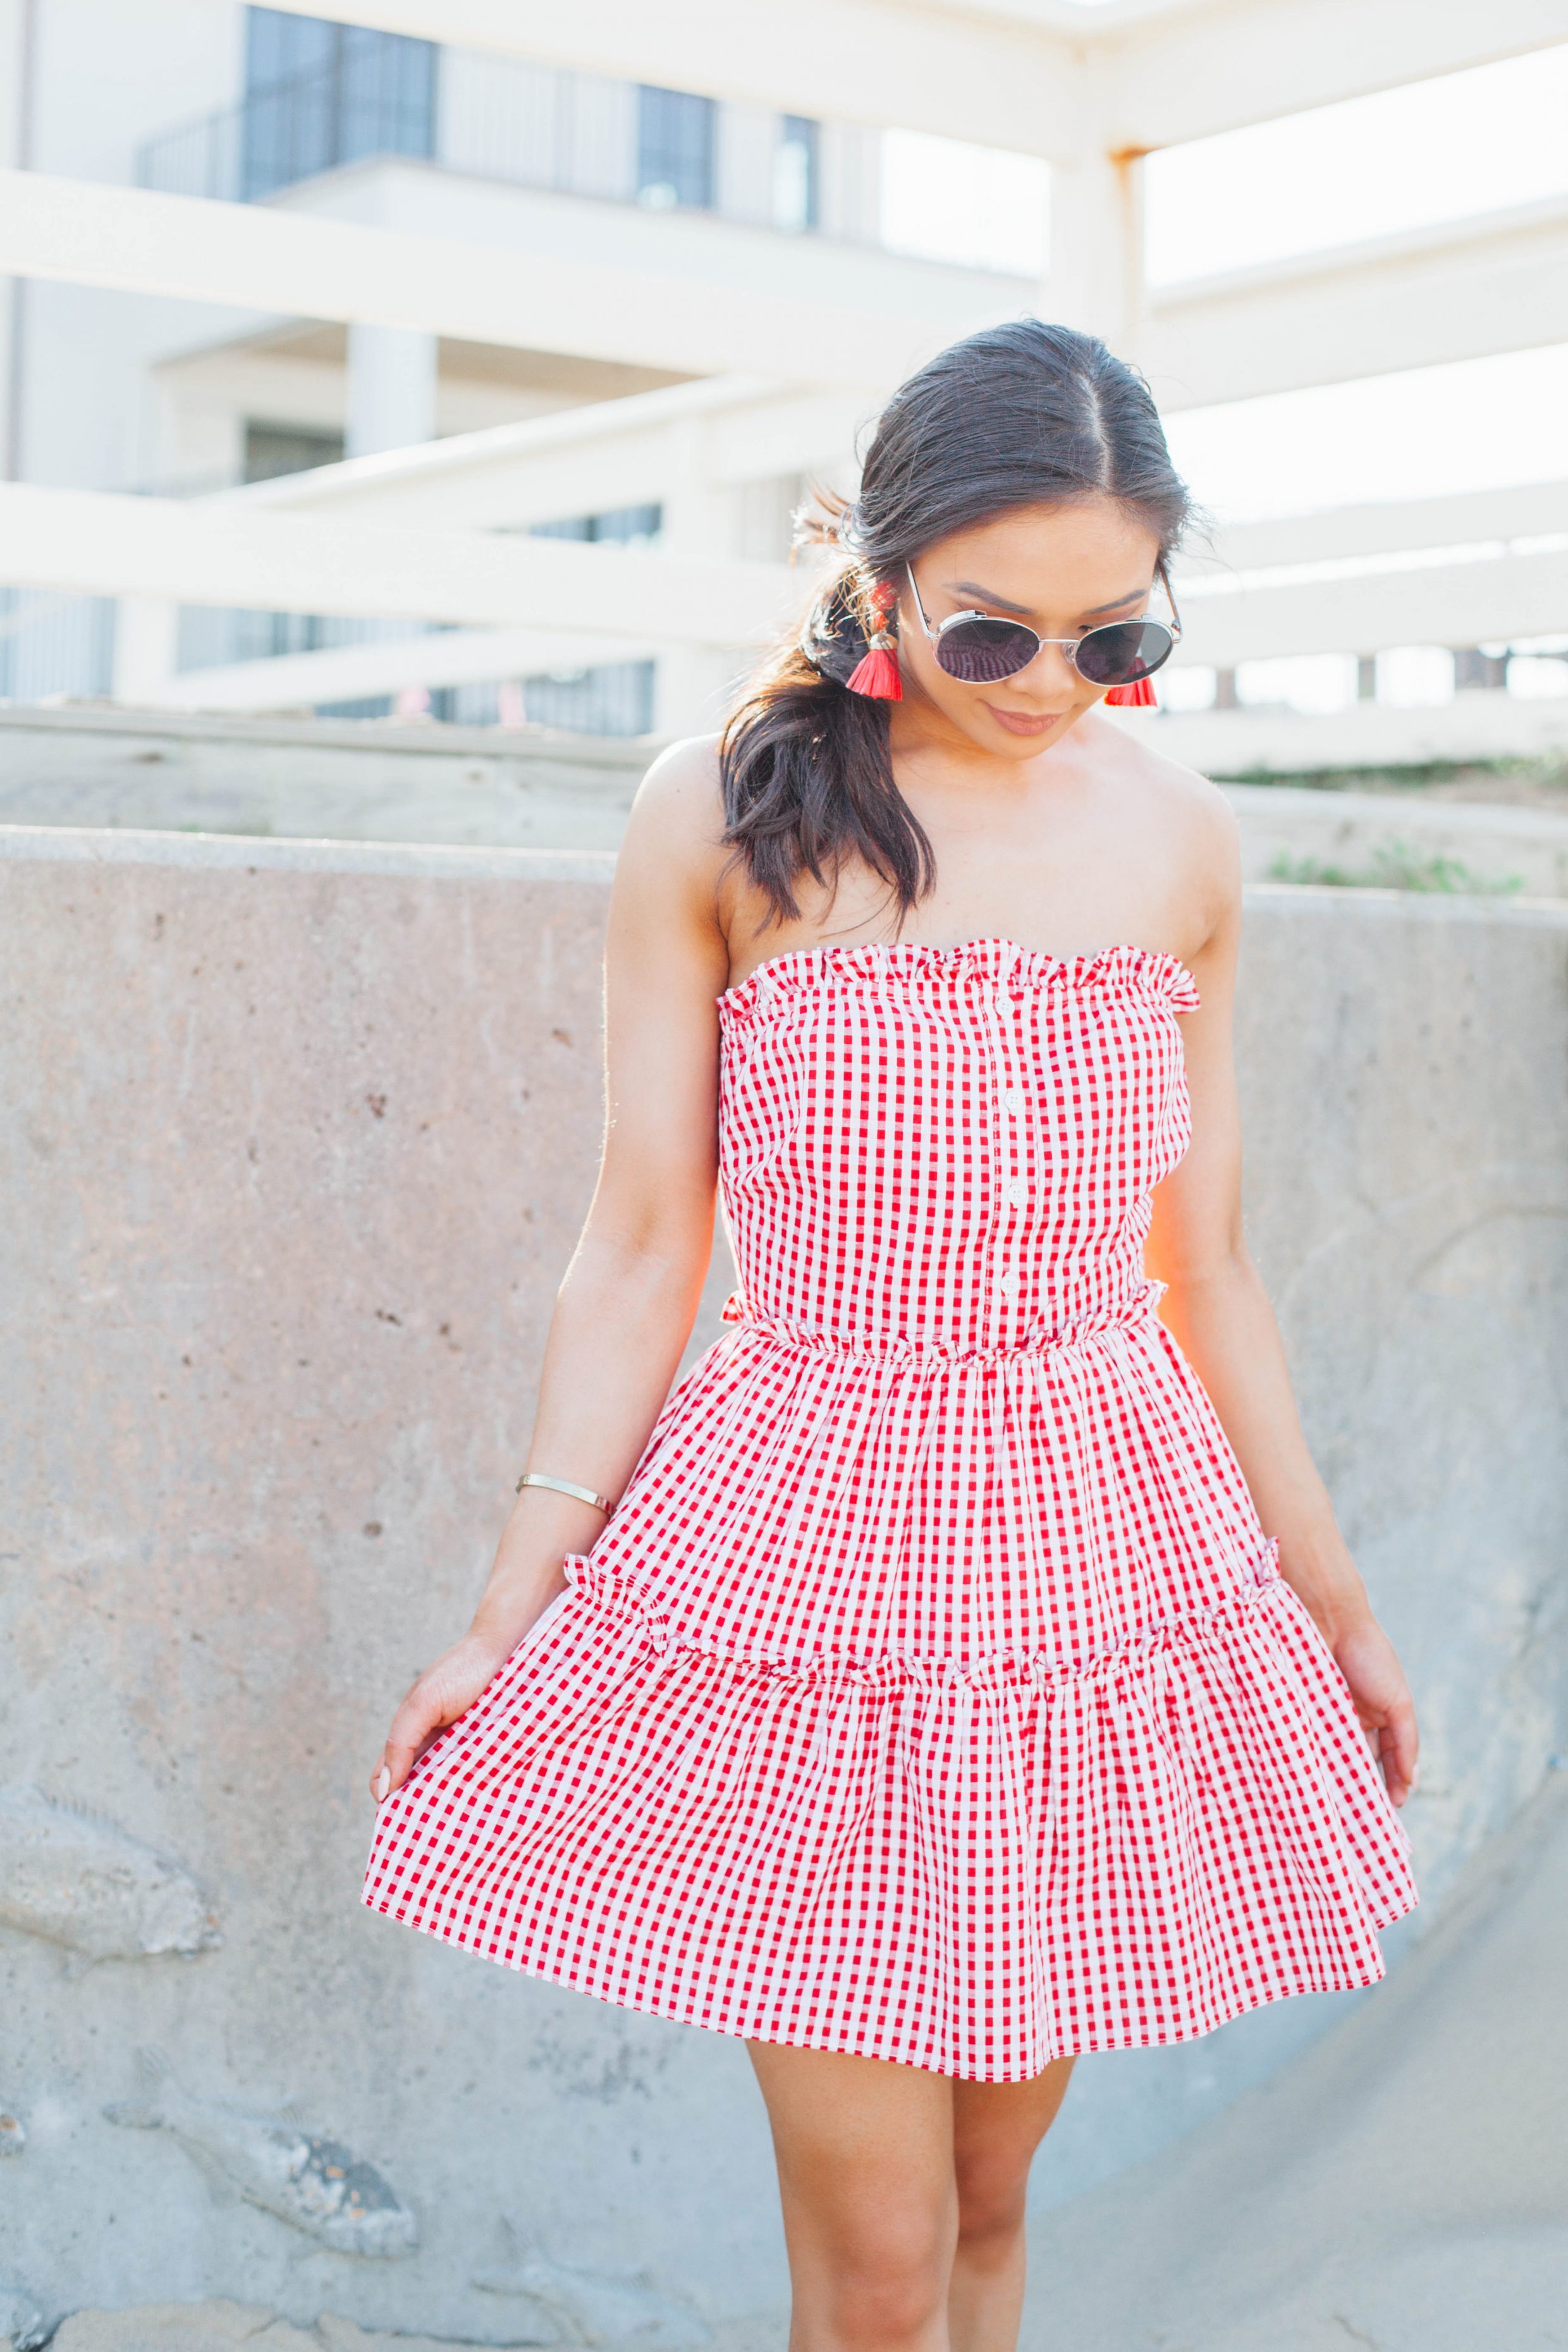 Hoang-Kim wears a red strapless gingham dress with raffia tassel earrings for summer